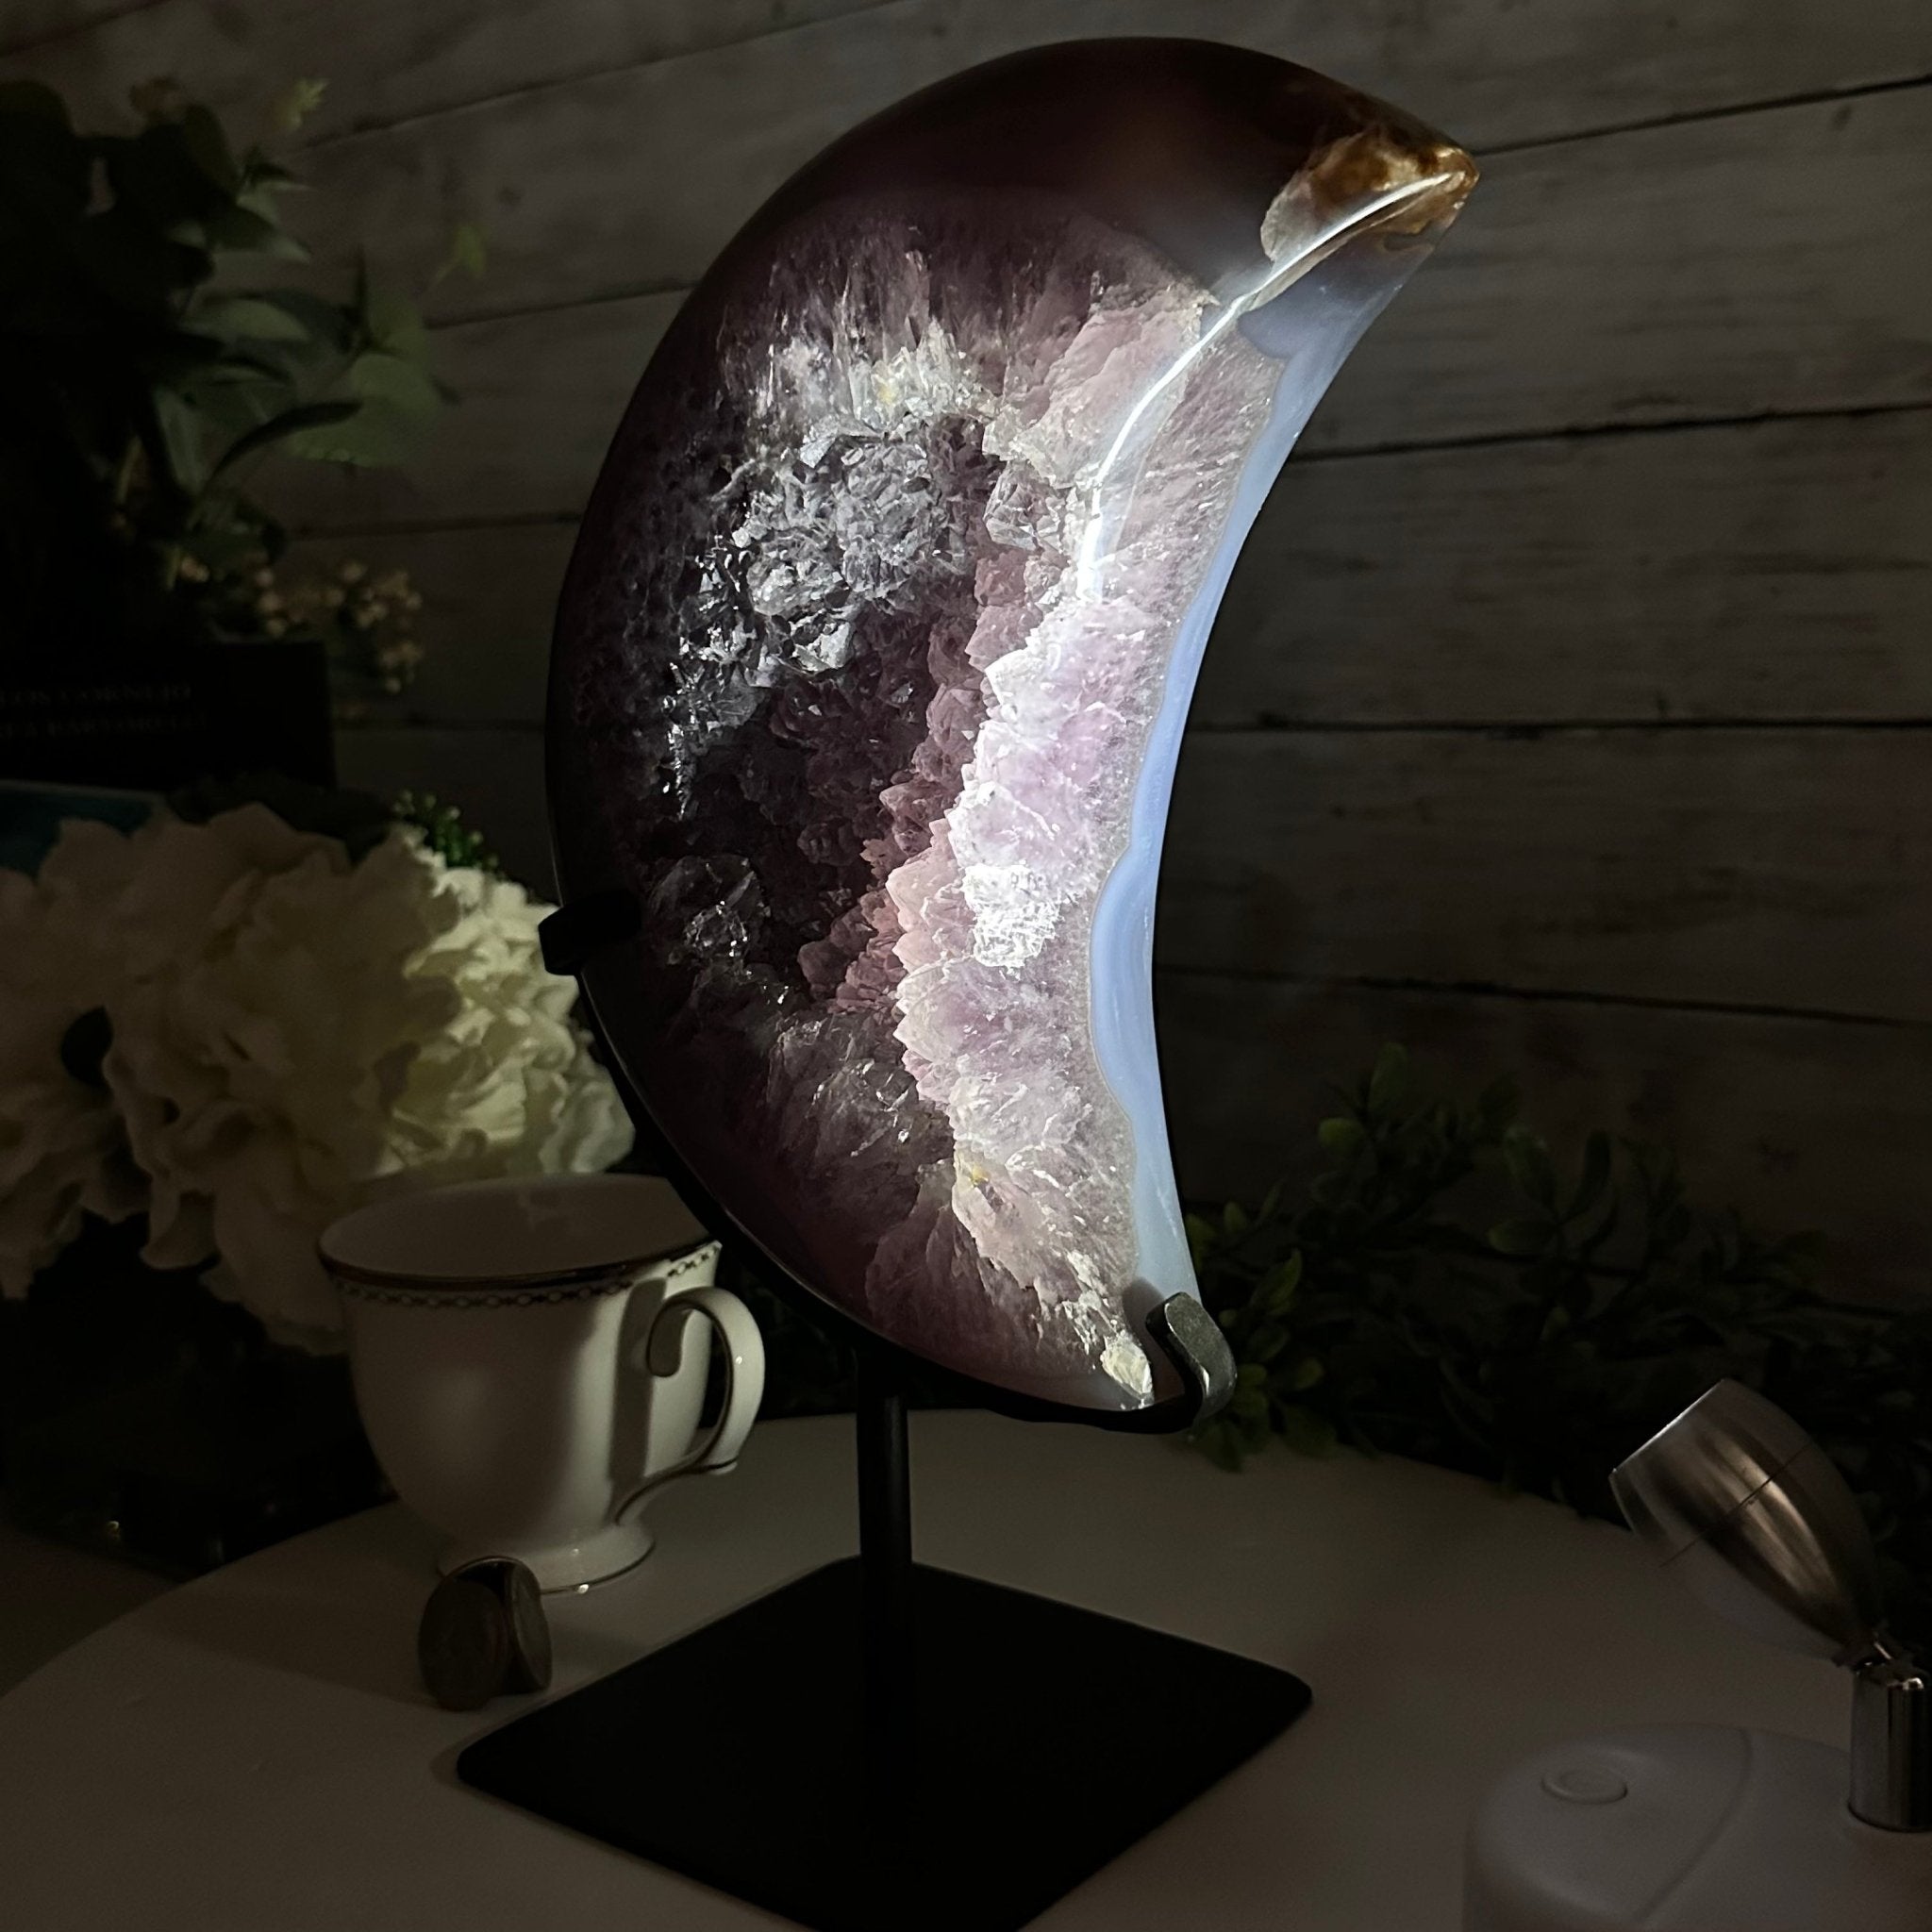 Polished Agate Crescent Moon on a Stand, 8 lbs & 11.75" Tall #5740NA-015 by Brazil Gems - Brazil GemsBrazil GemsPolished Agate Crescent Moon on a Stand, 8 lbs & 11.75" Tall #5740NA-015 by Brazil GemsCrescent Moons5740NA-015